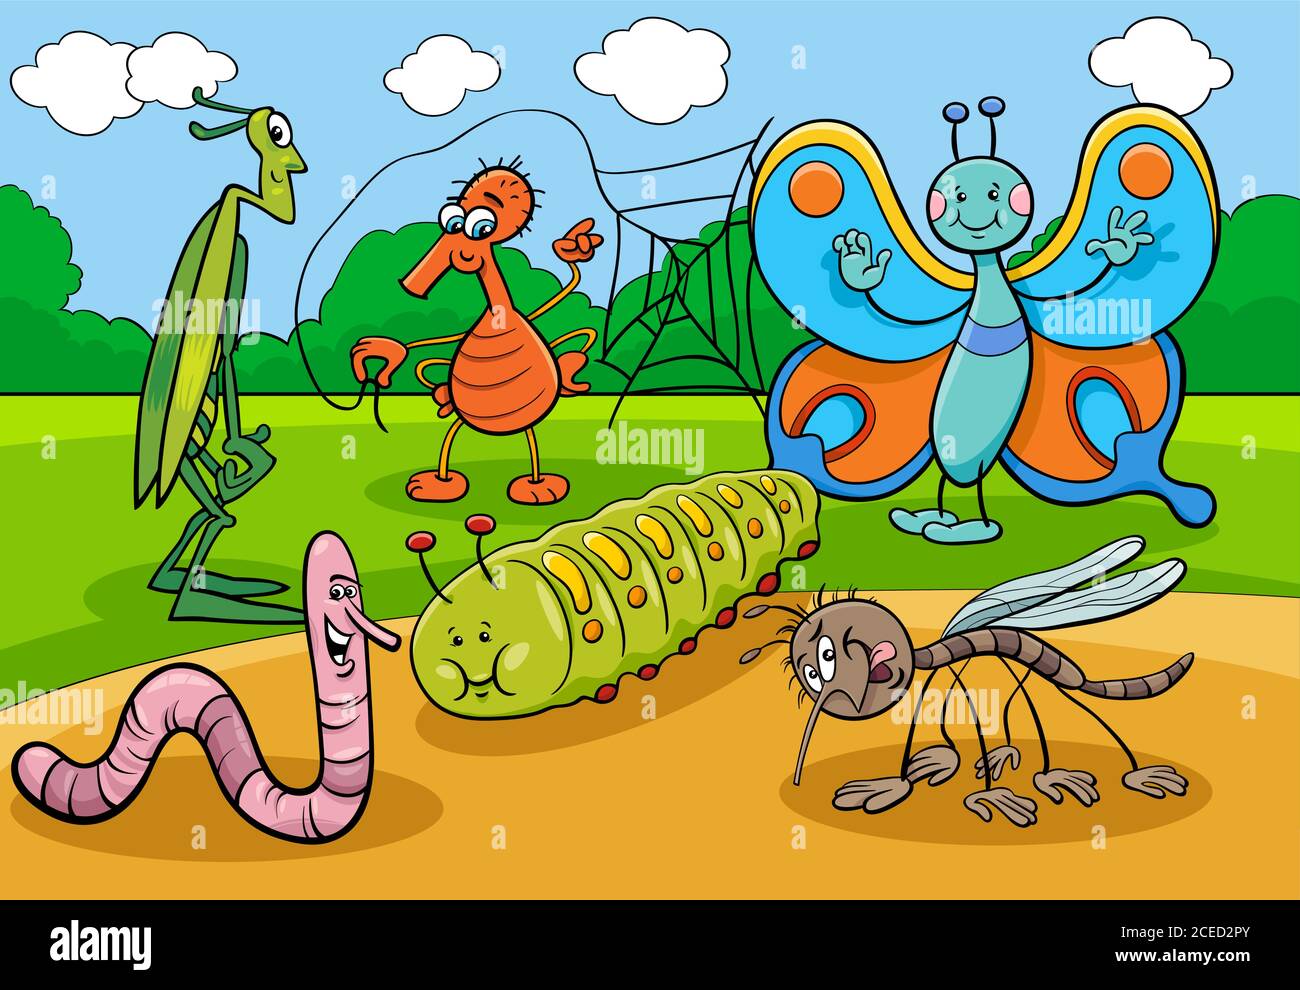 Cartoon Illustration of Happy Insects and Bugs Animal Characters Group Stock Vector